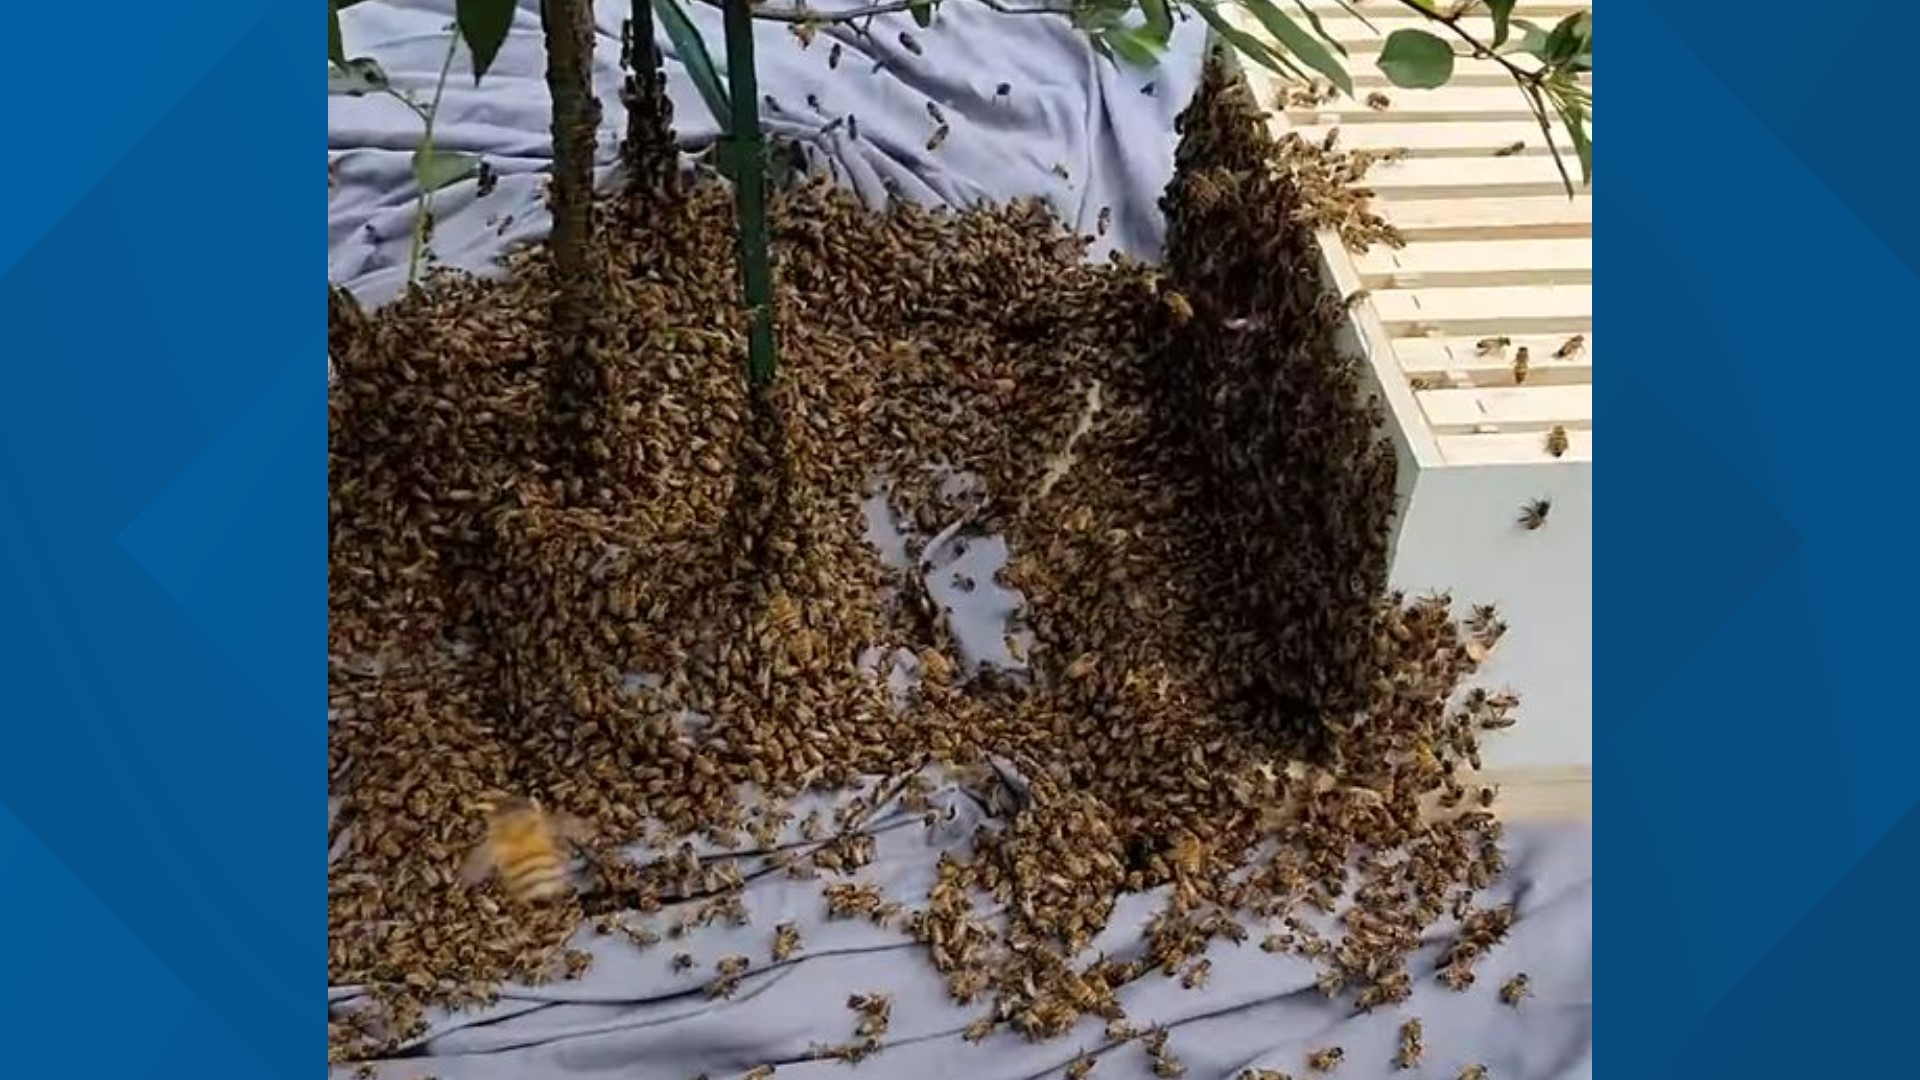 What started as one hive has now grown to two! Joshua Whitney decided to pick up beekeeping during the pandemic, and it has paid off sweet dividends.